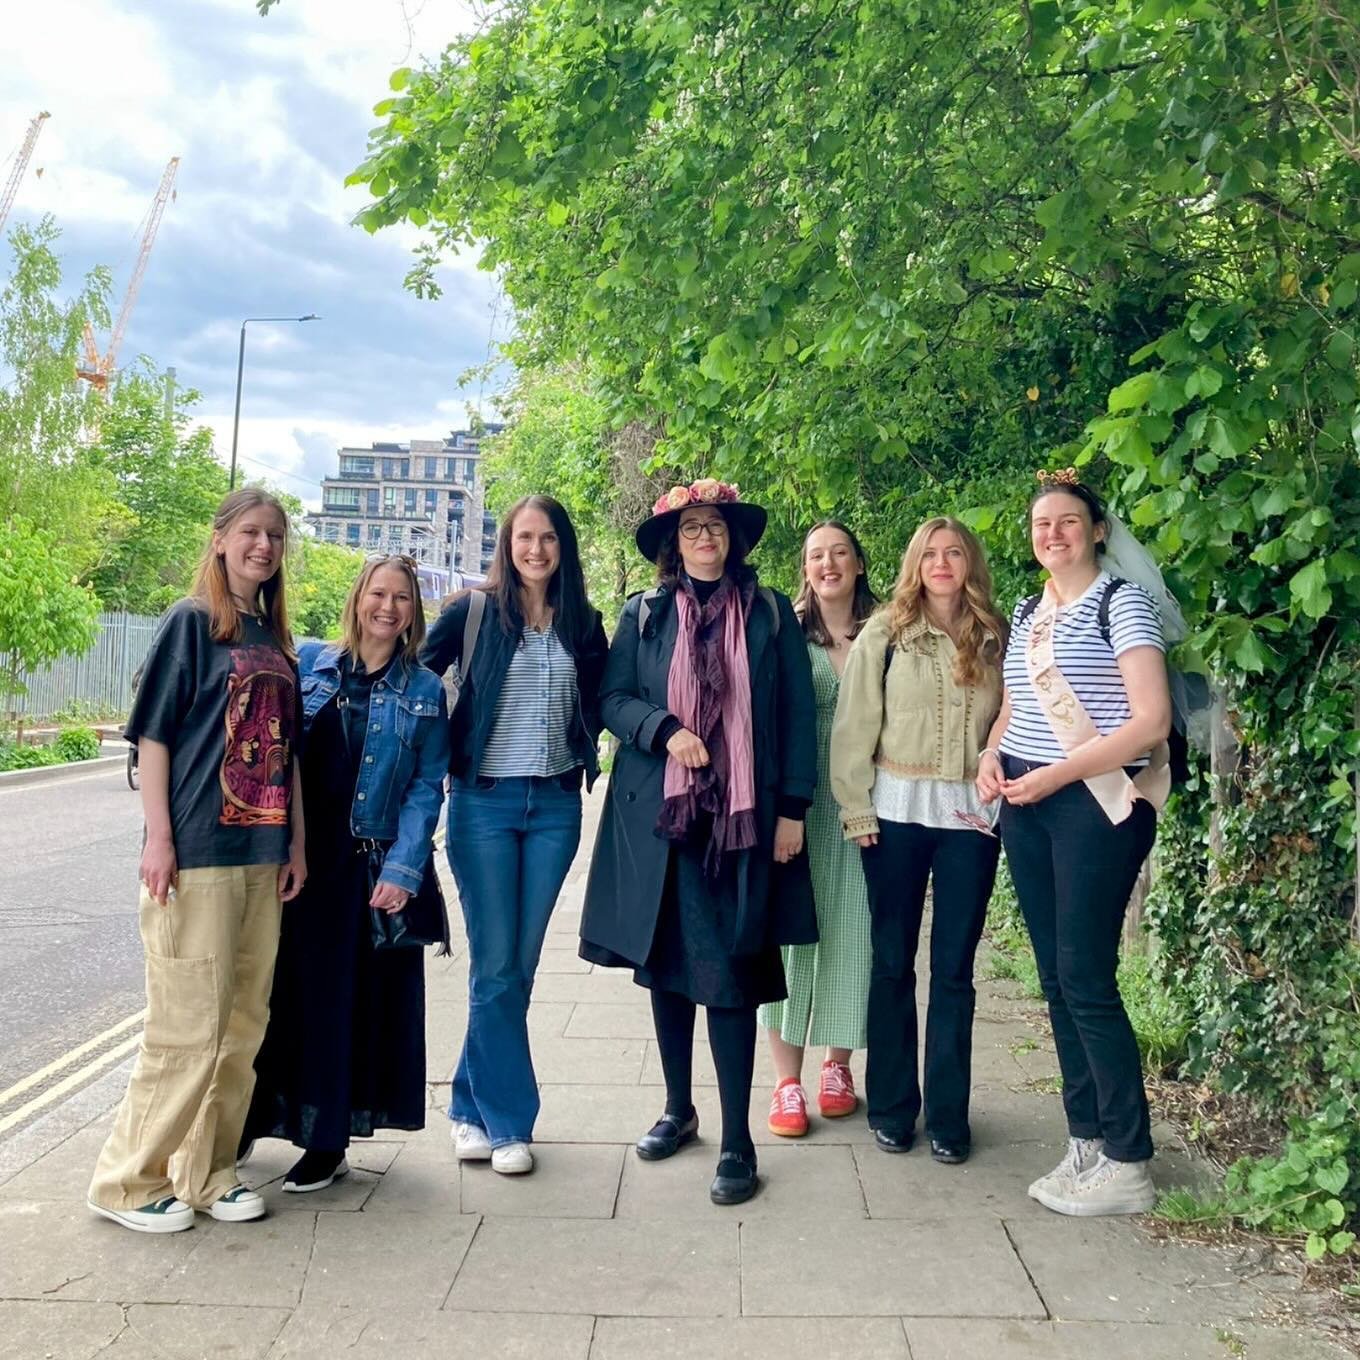 This weekend I guided a hen do with a difference - we explored gothic literature and the literary ladies of Bloomsbury!

We began at St Pancras Old Church cemetery - who doesn&rsquo;t start their bachelorette in a cemetery? - to visit the tomb of Mar